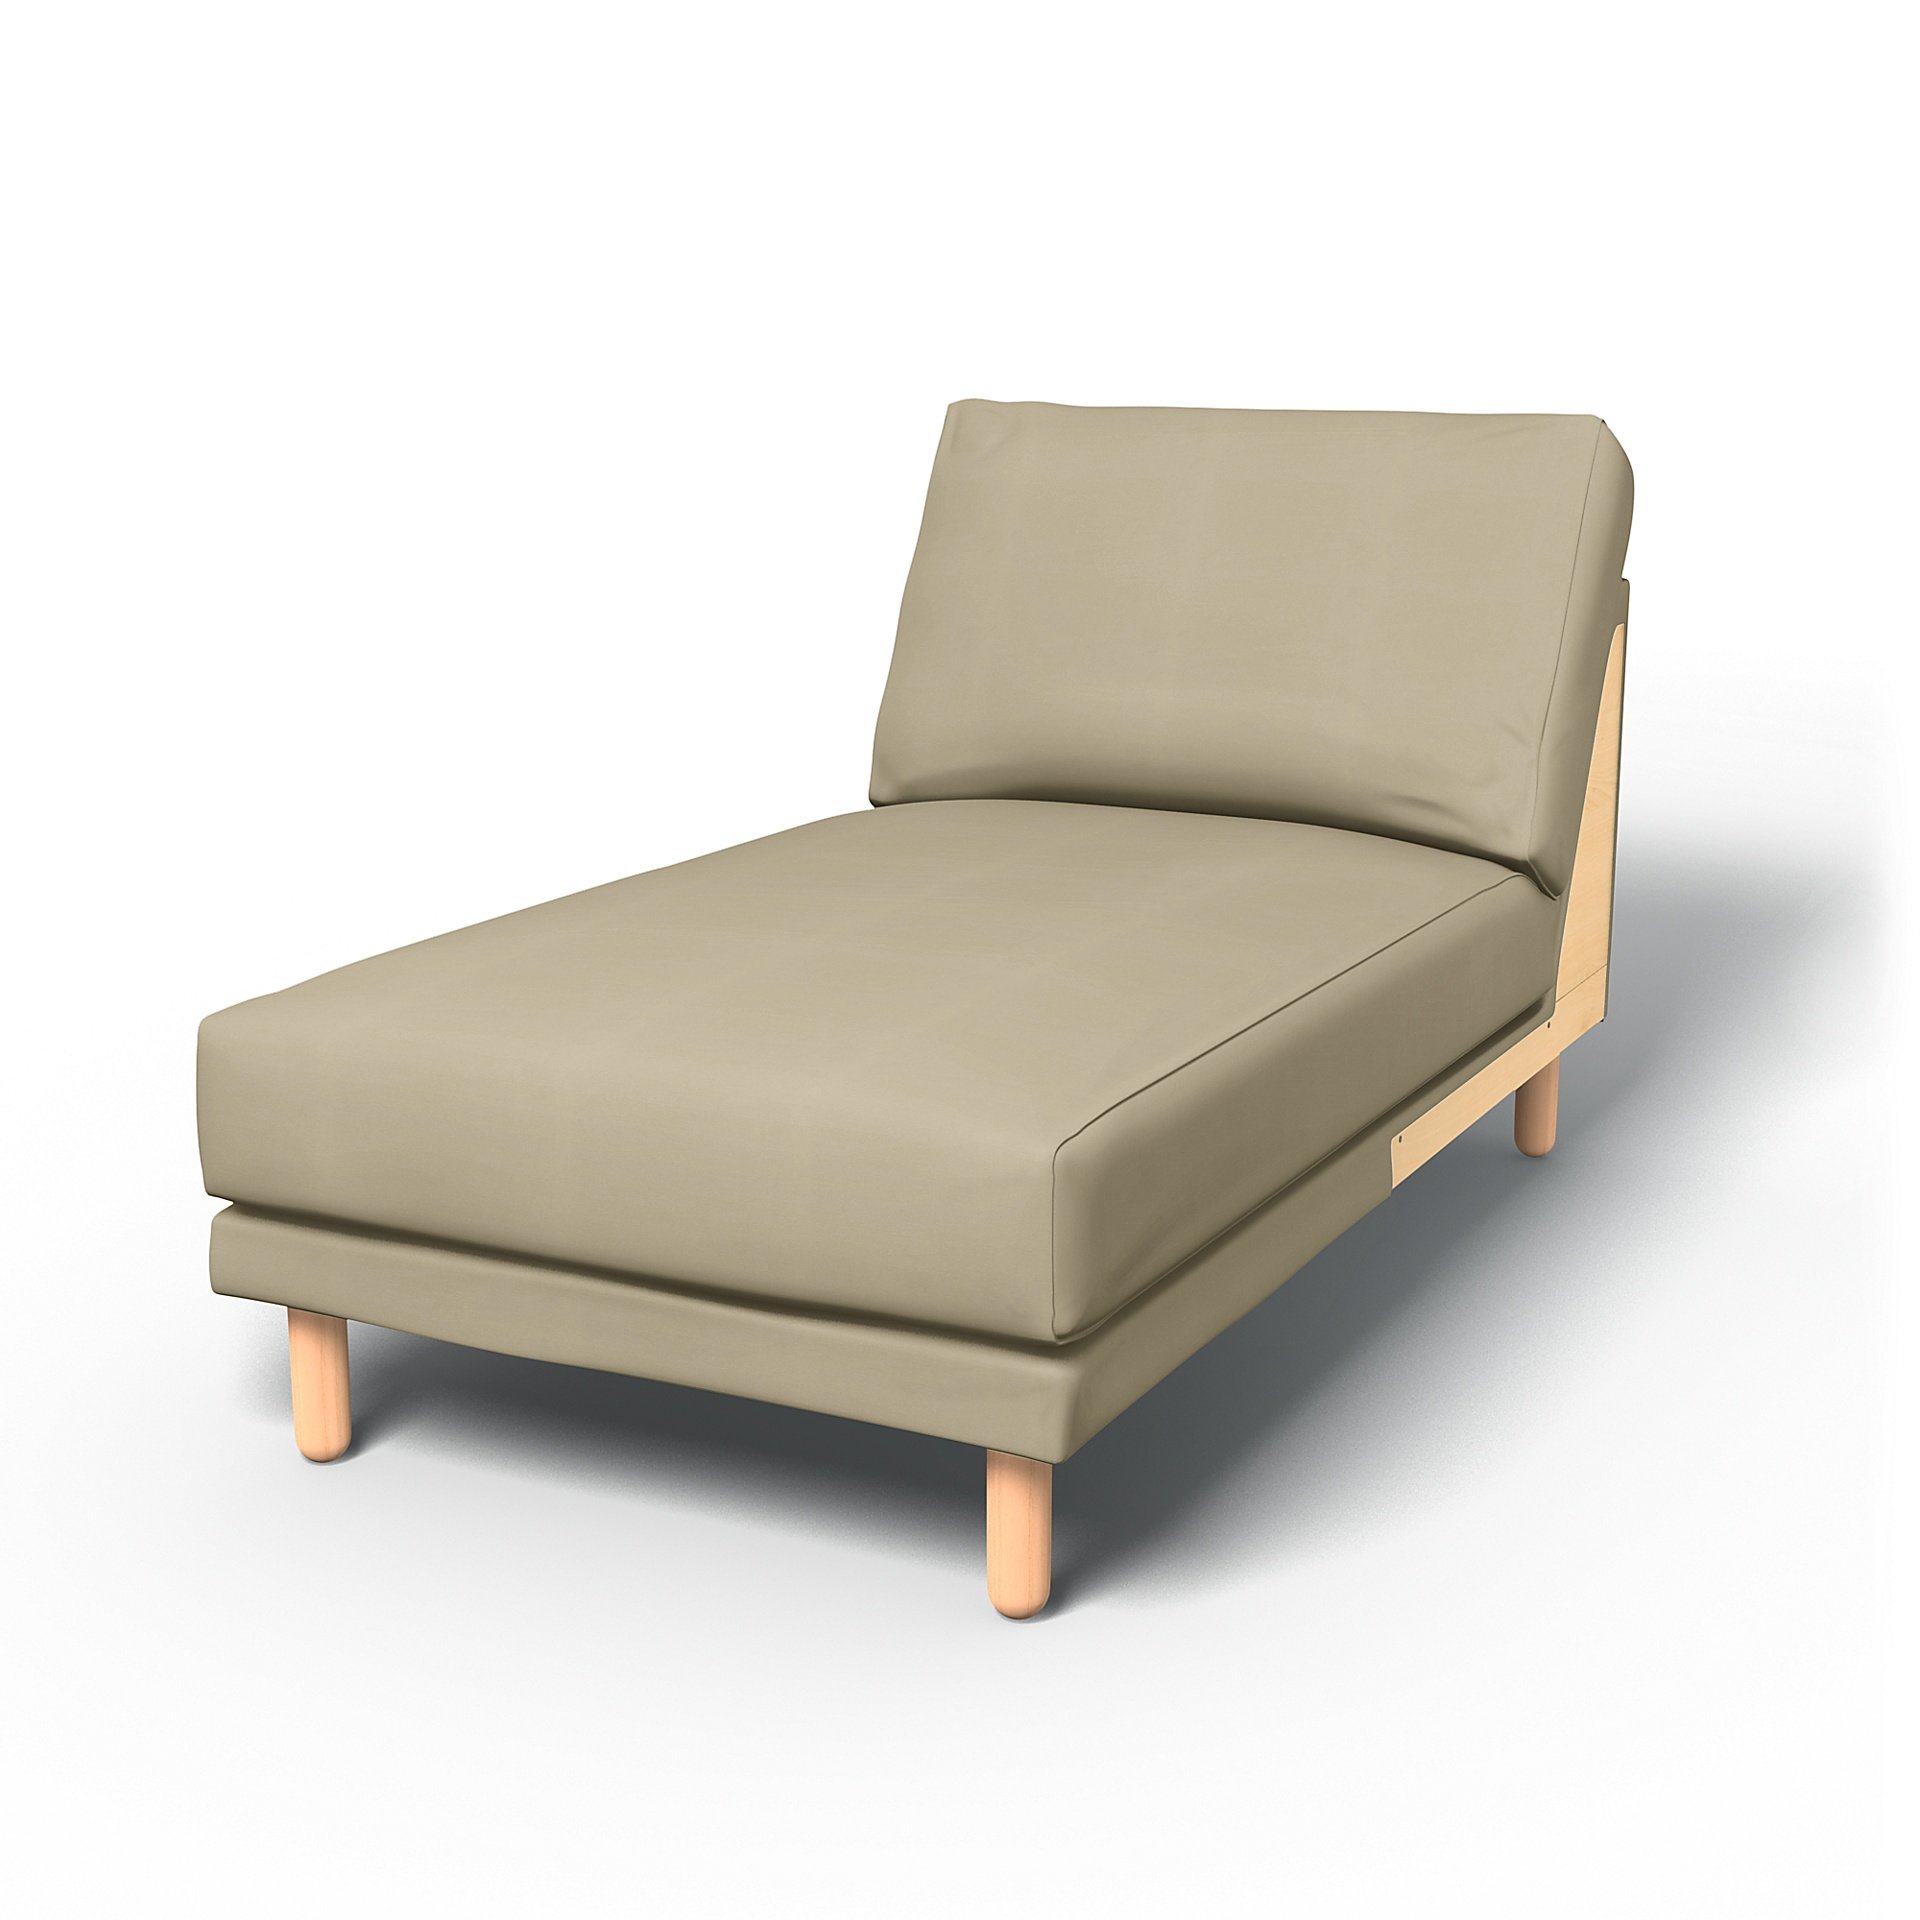 Norsborg Add On Unit Chaise